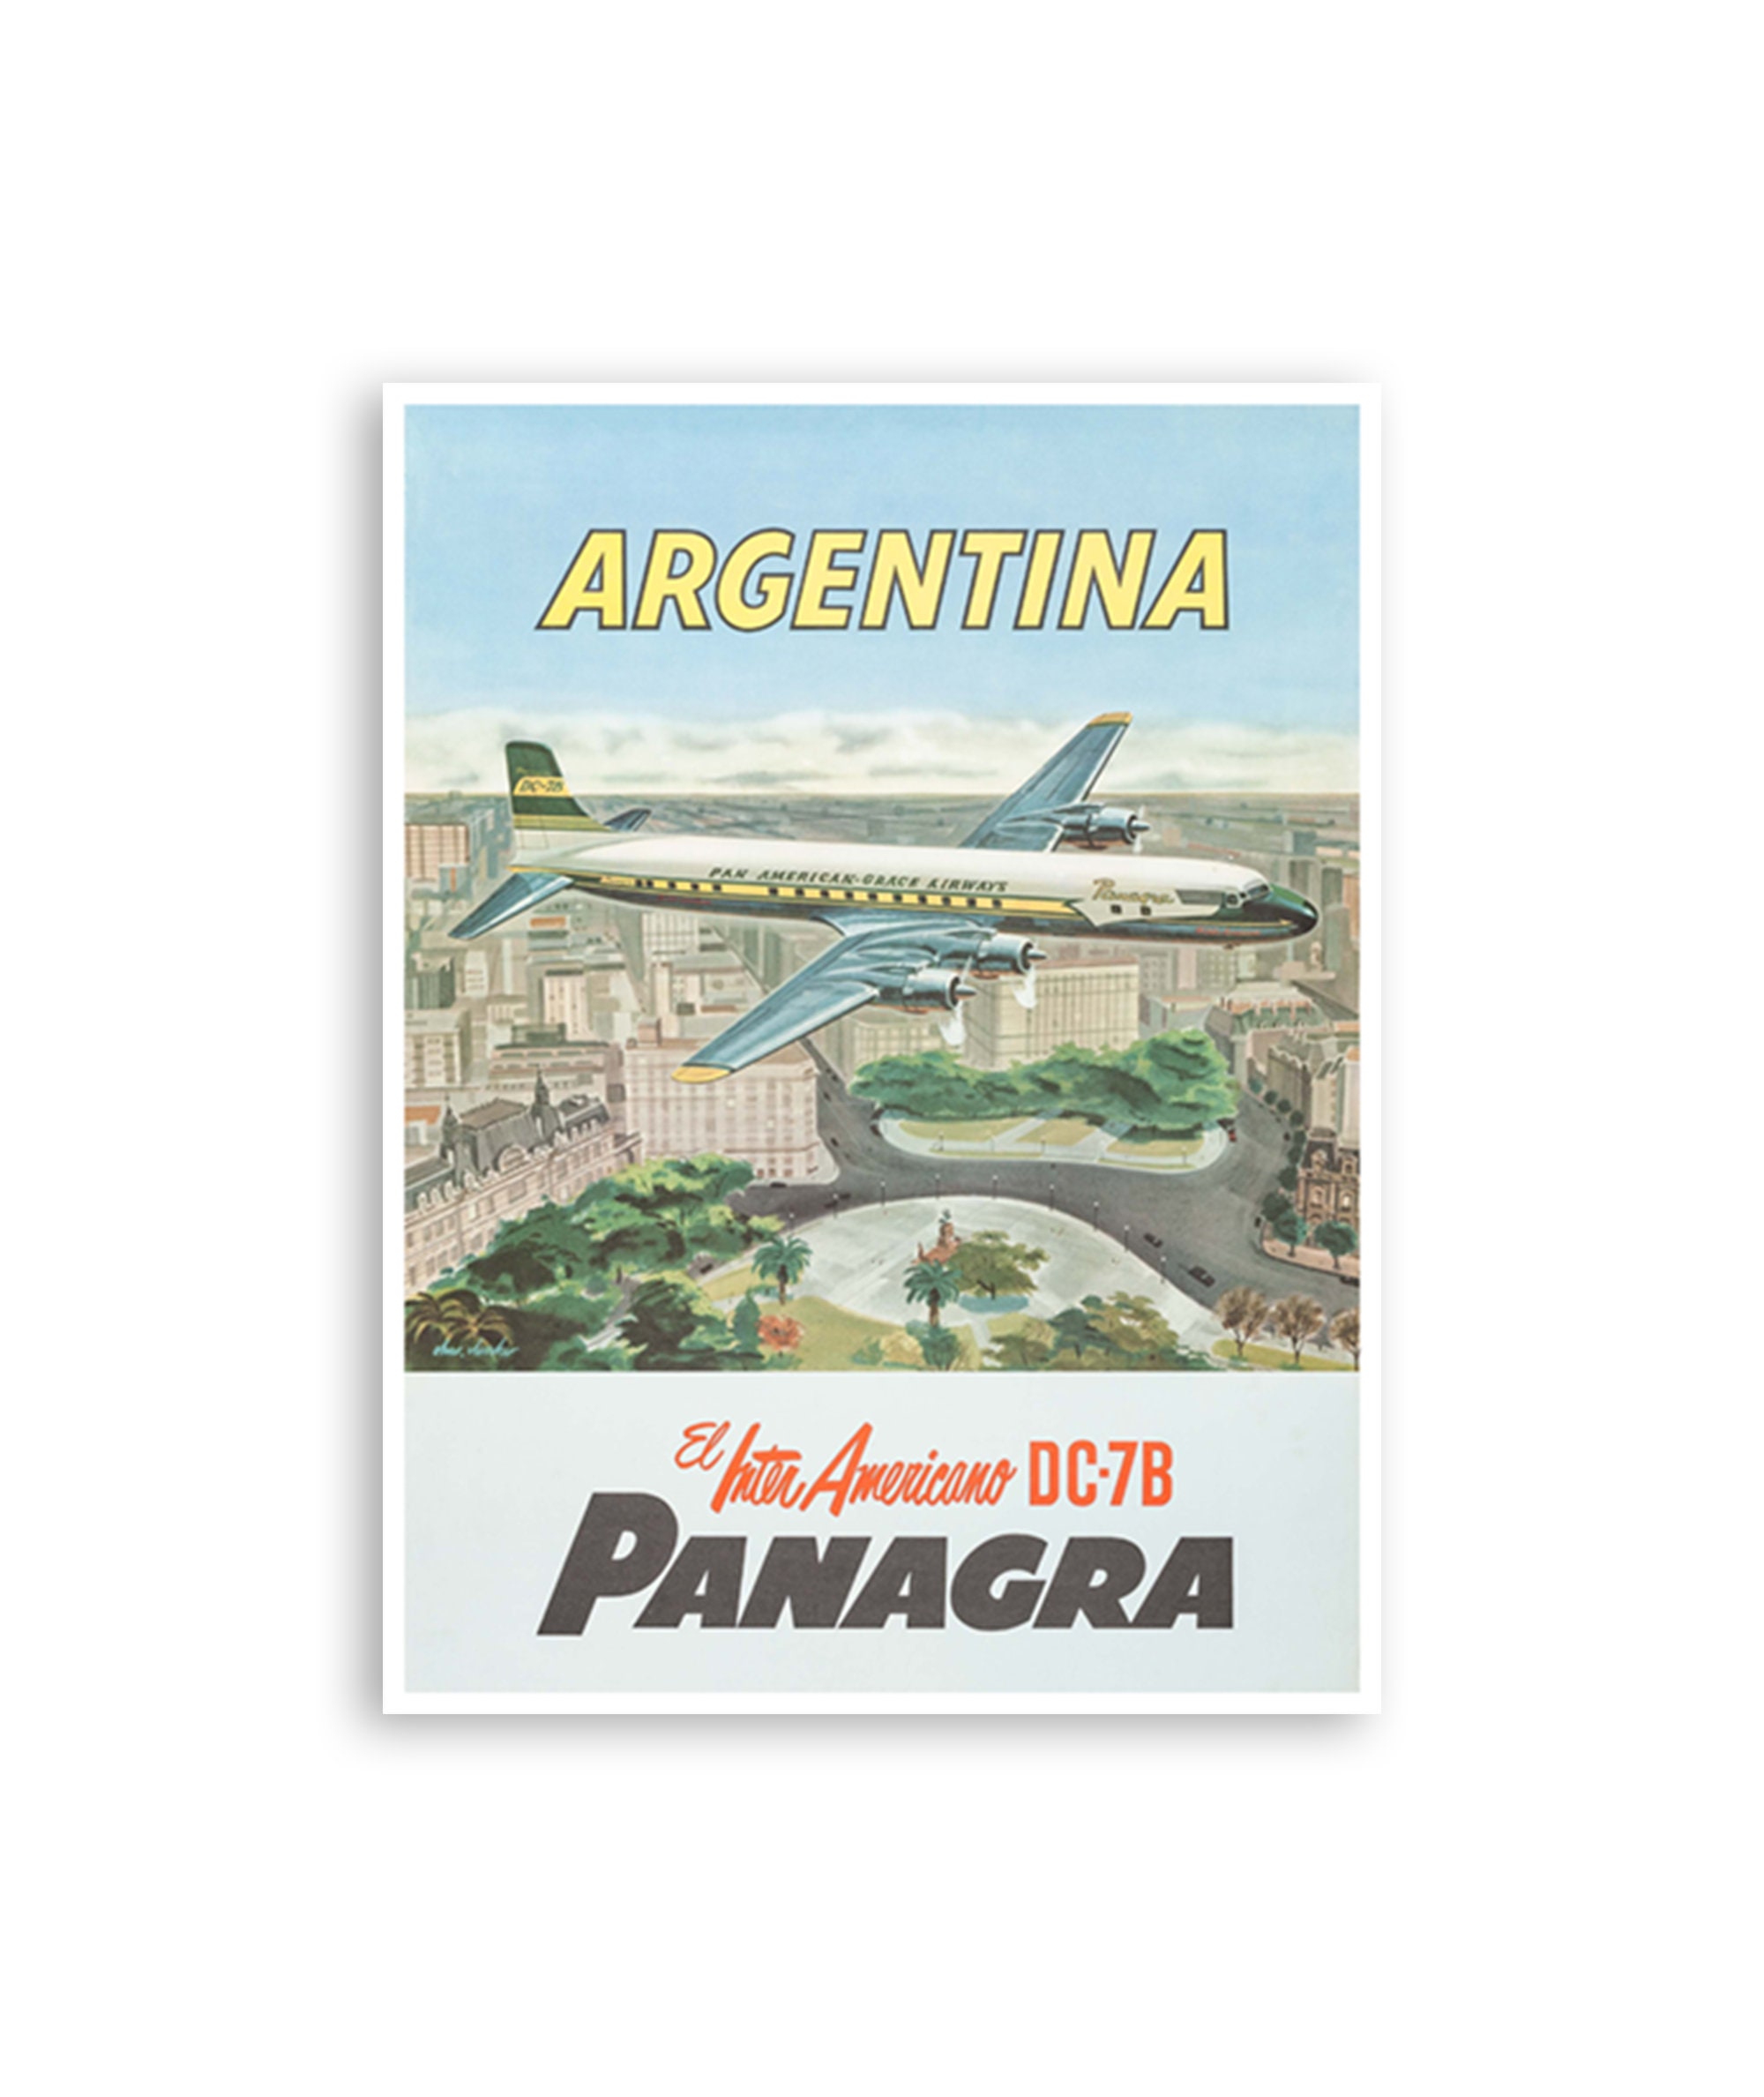 Argentina Panagra South America American Vintage Travel Advertisement Poster 